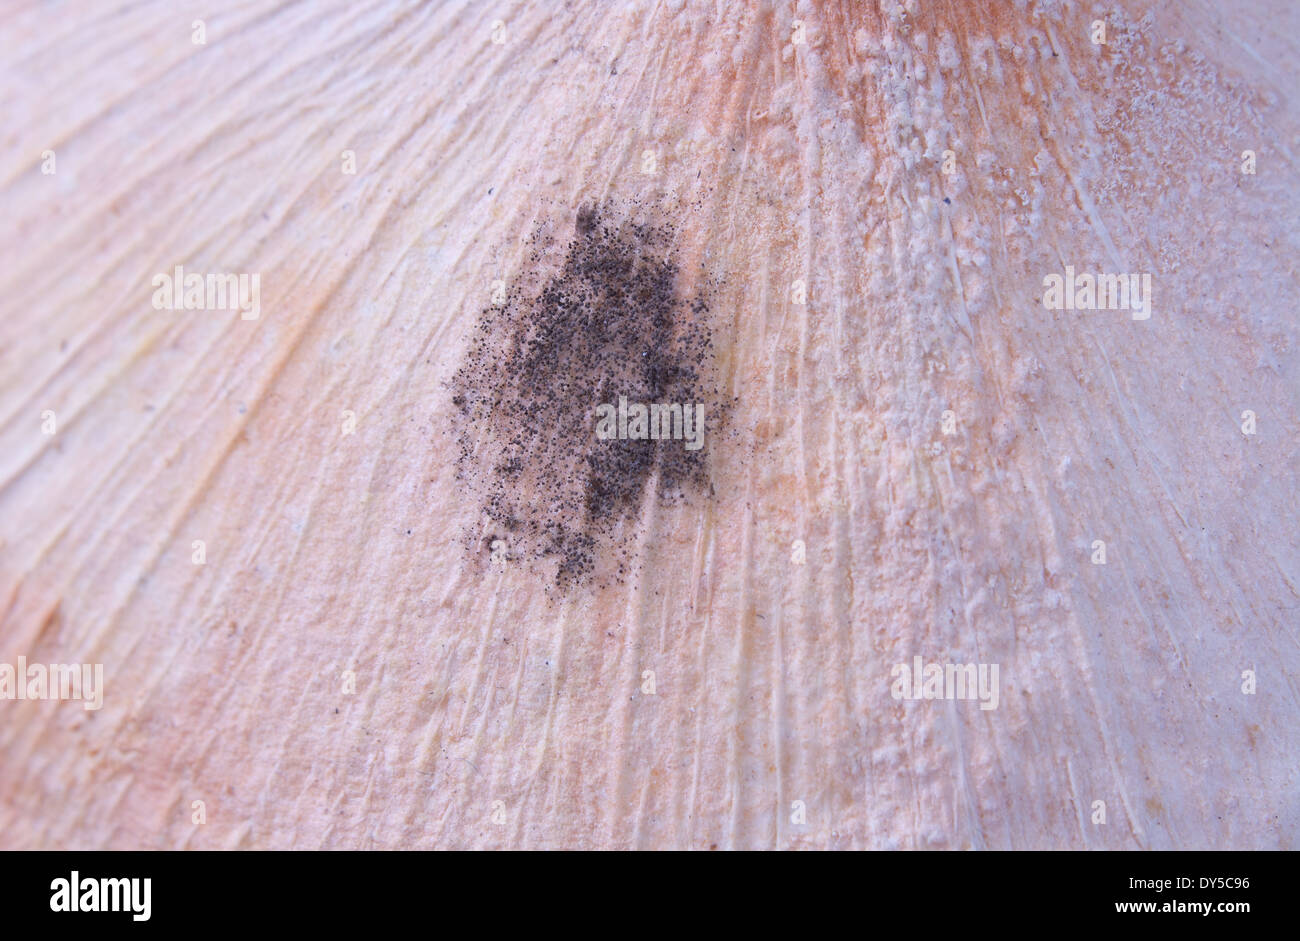 Mold On Food White And Black Mold Stock Photo 68346242 Alamy